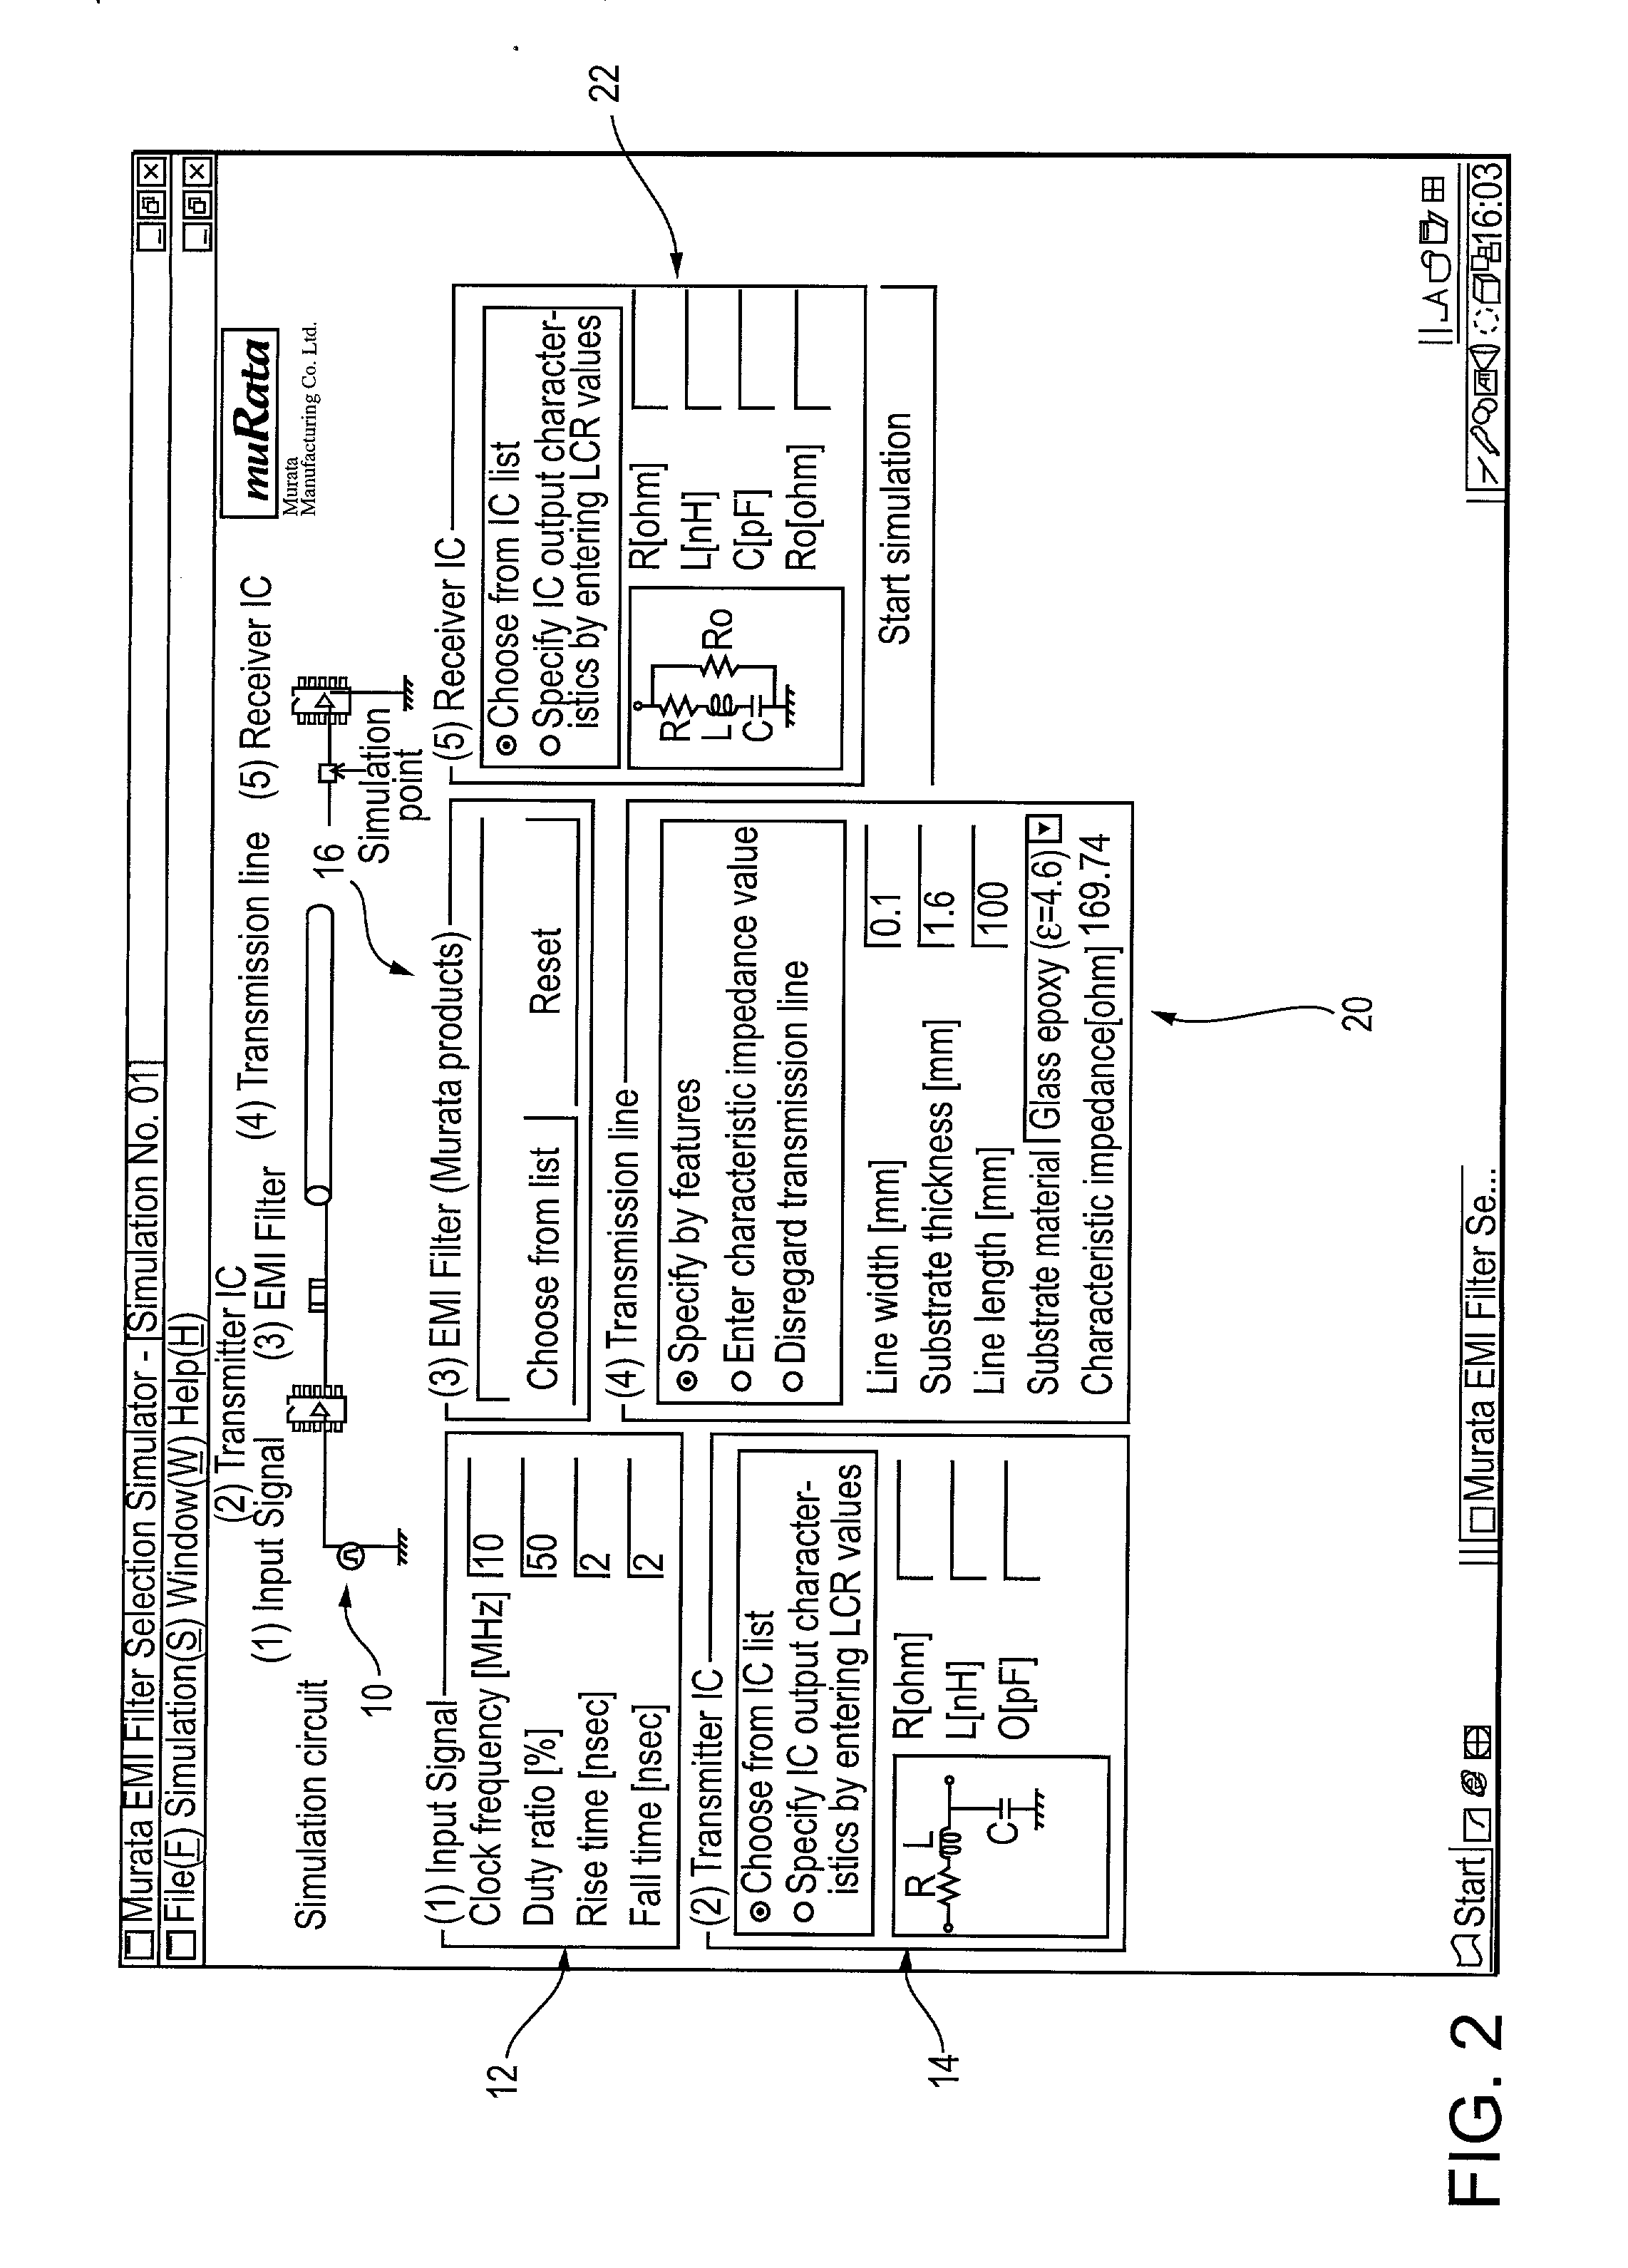 Method and apparatus for analyzing noise in a digital circuit, and storage medium storing an analysis program